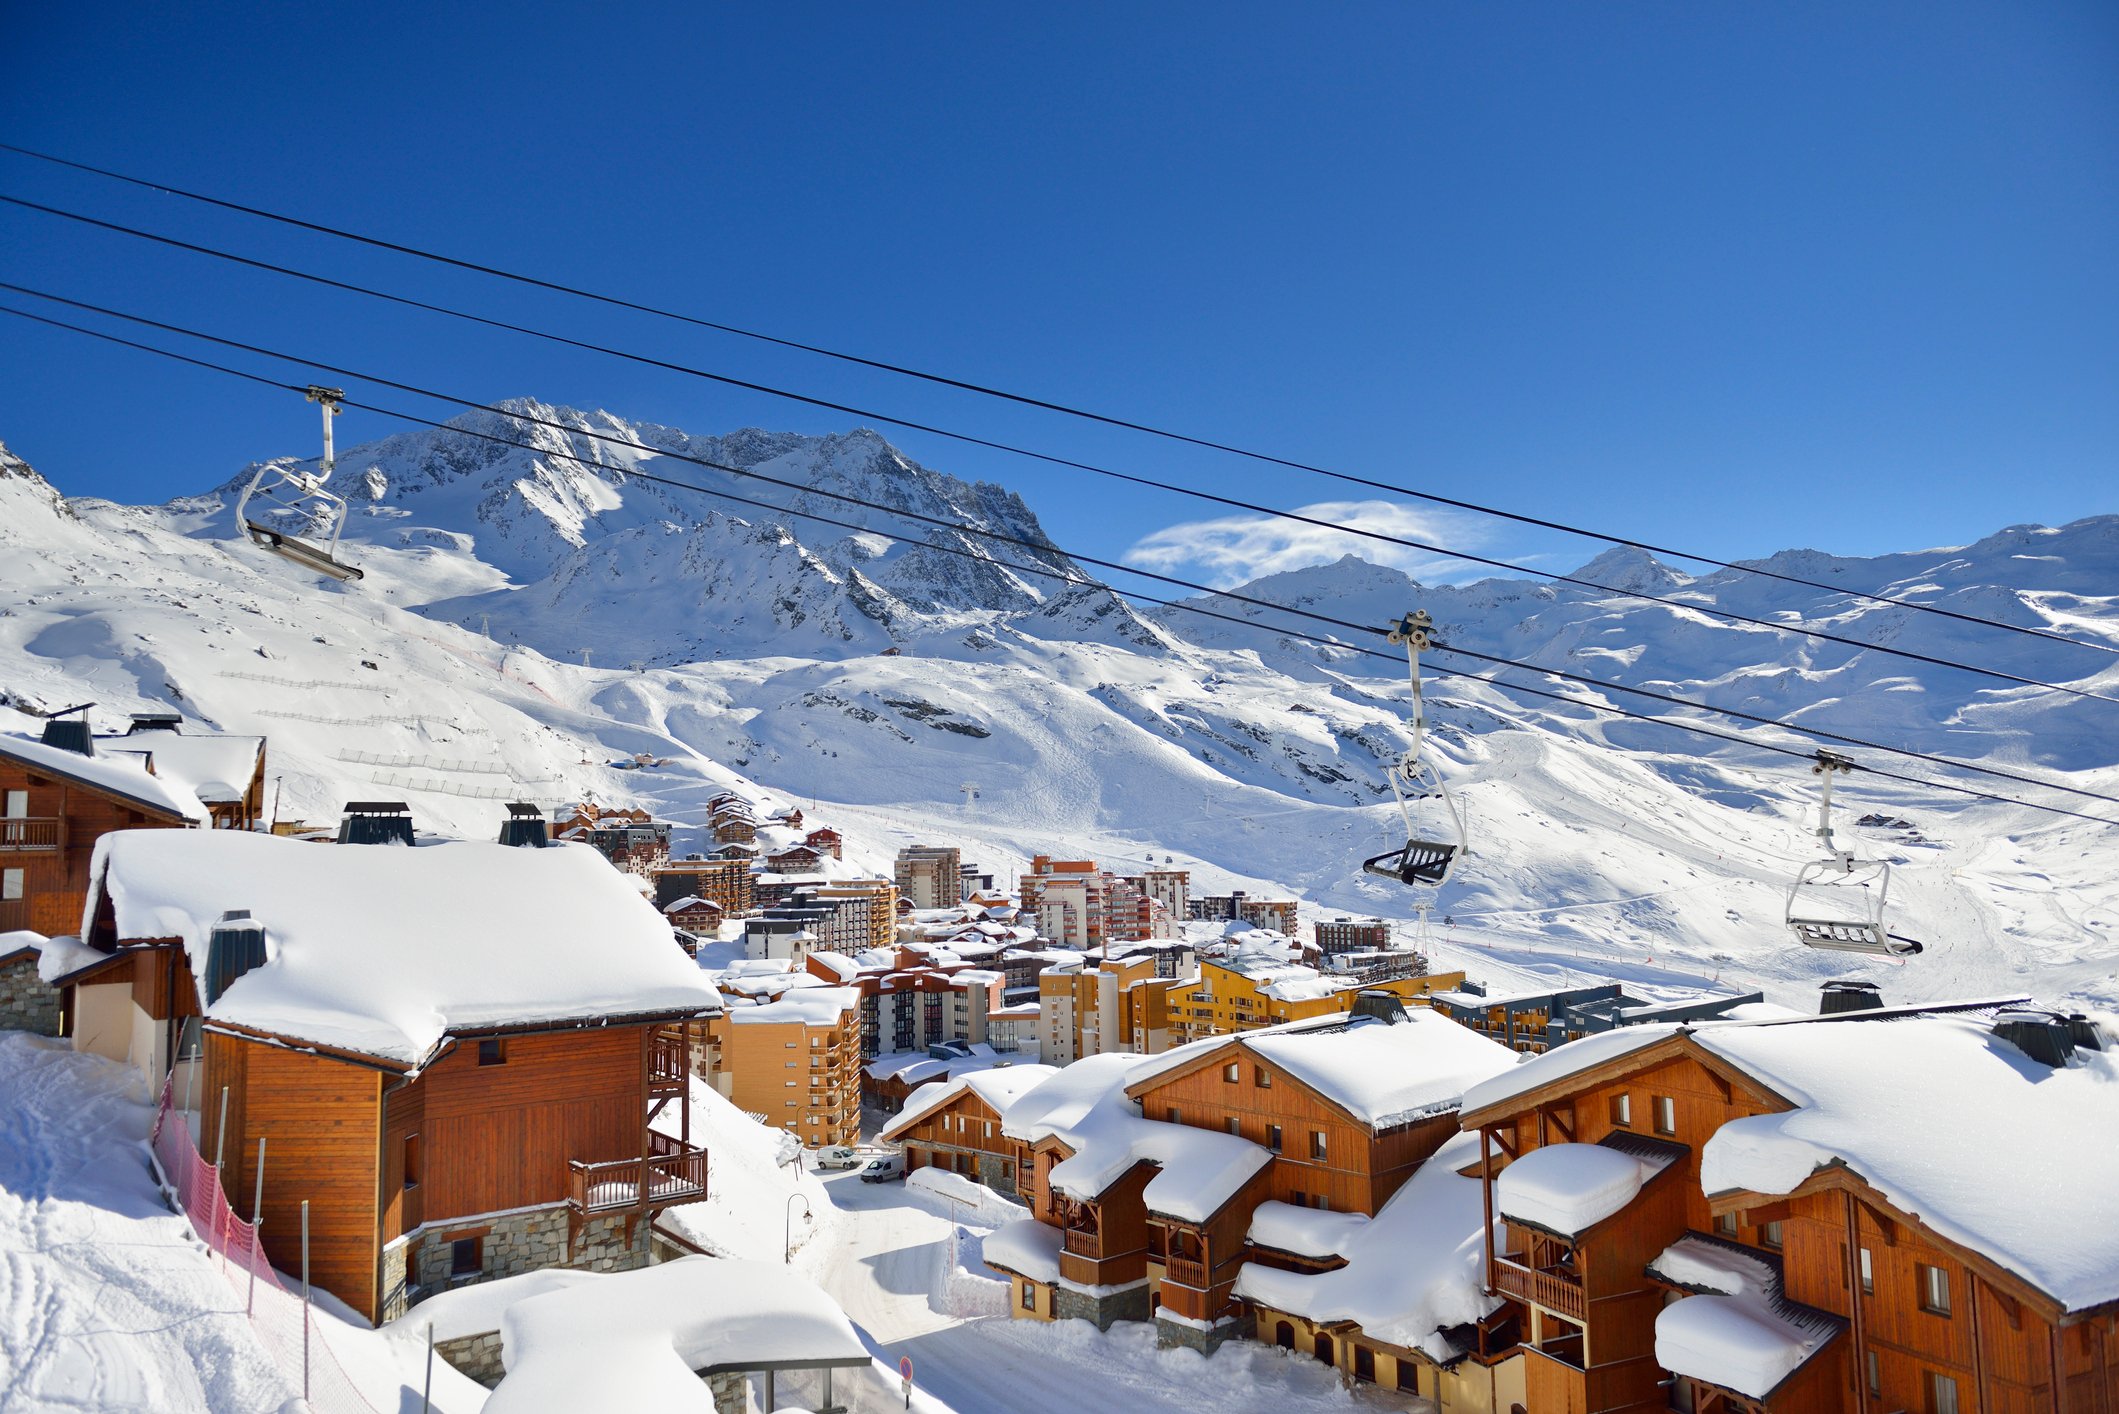 A snowy view of Val Thorens in the French Alps